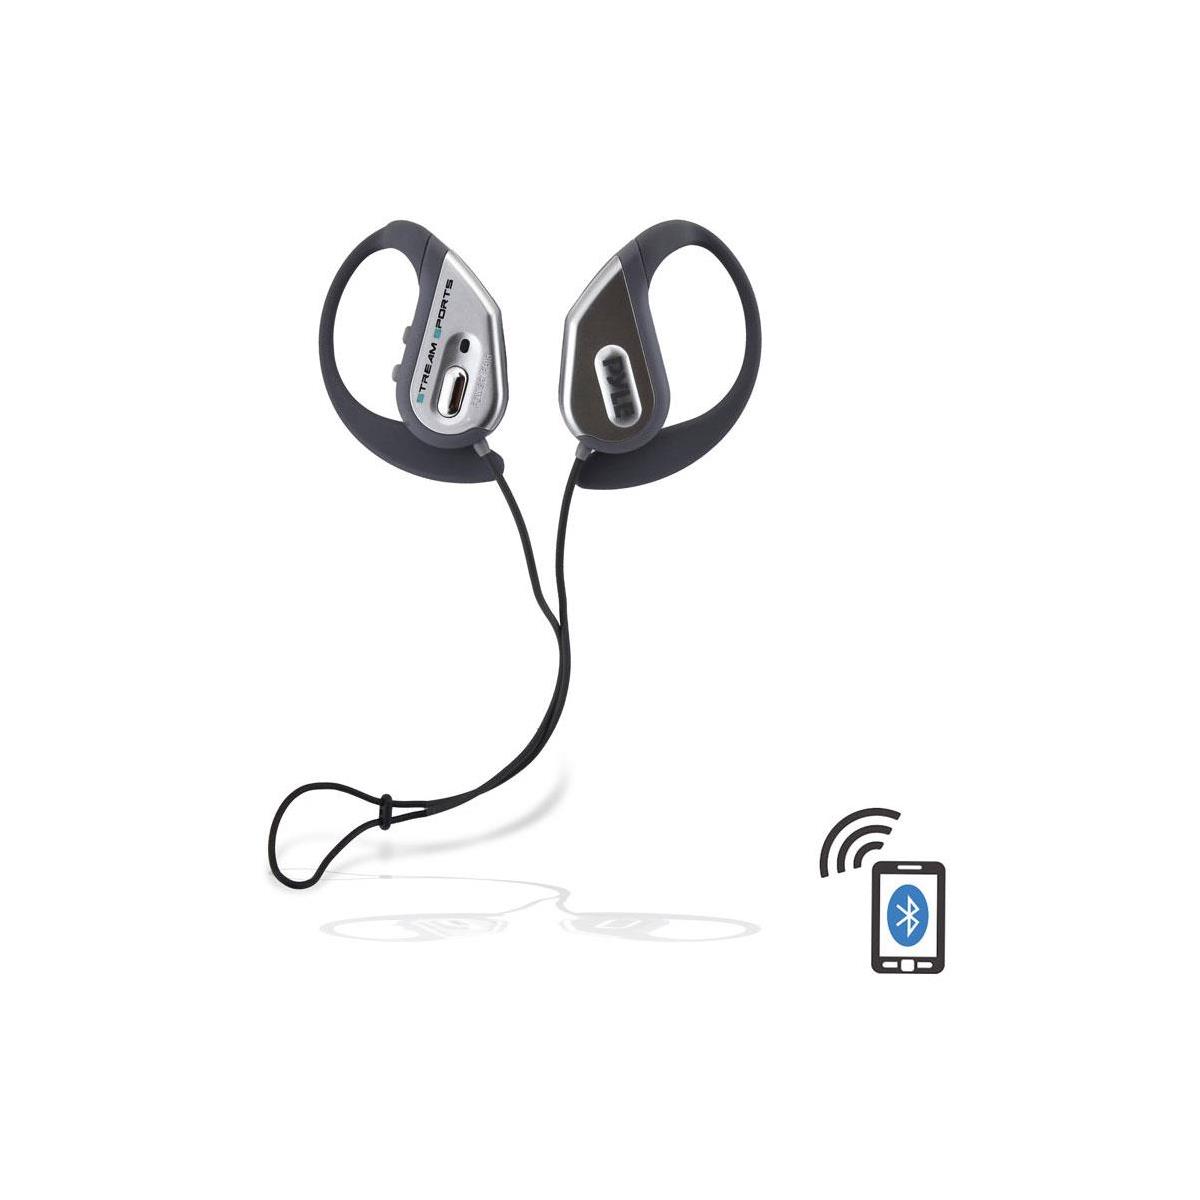 Image of Pyle PWBH18 Bluetooth Sports Headphones with Built-In Mic